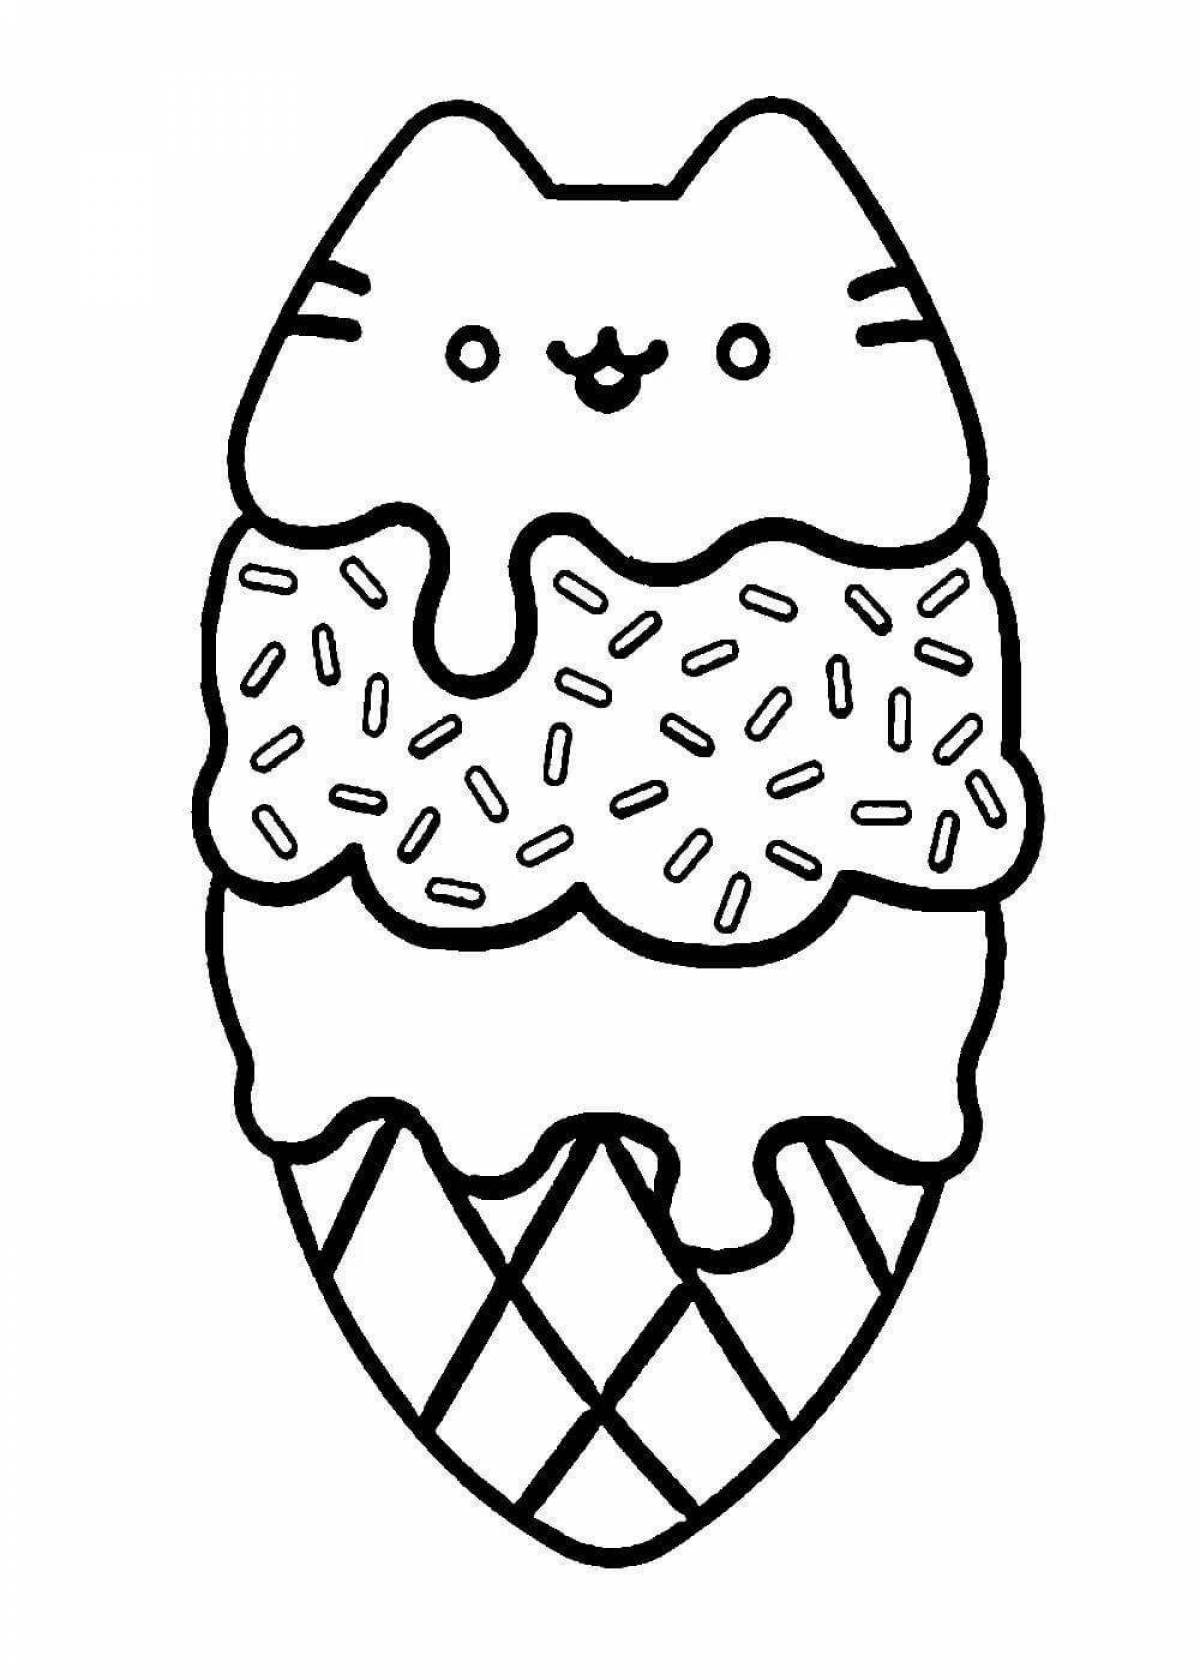 Coloring page of colorful kawaii cat